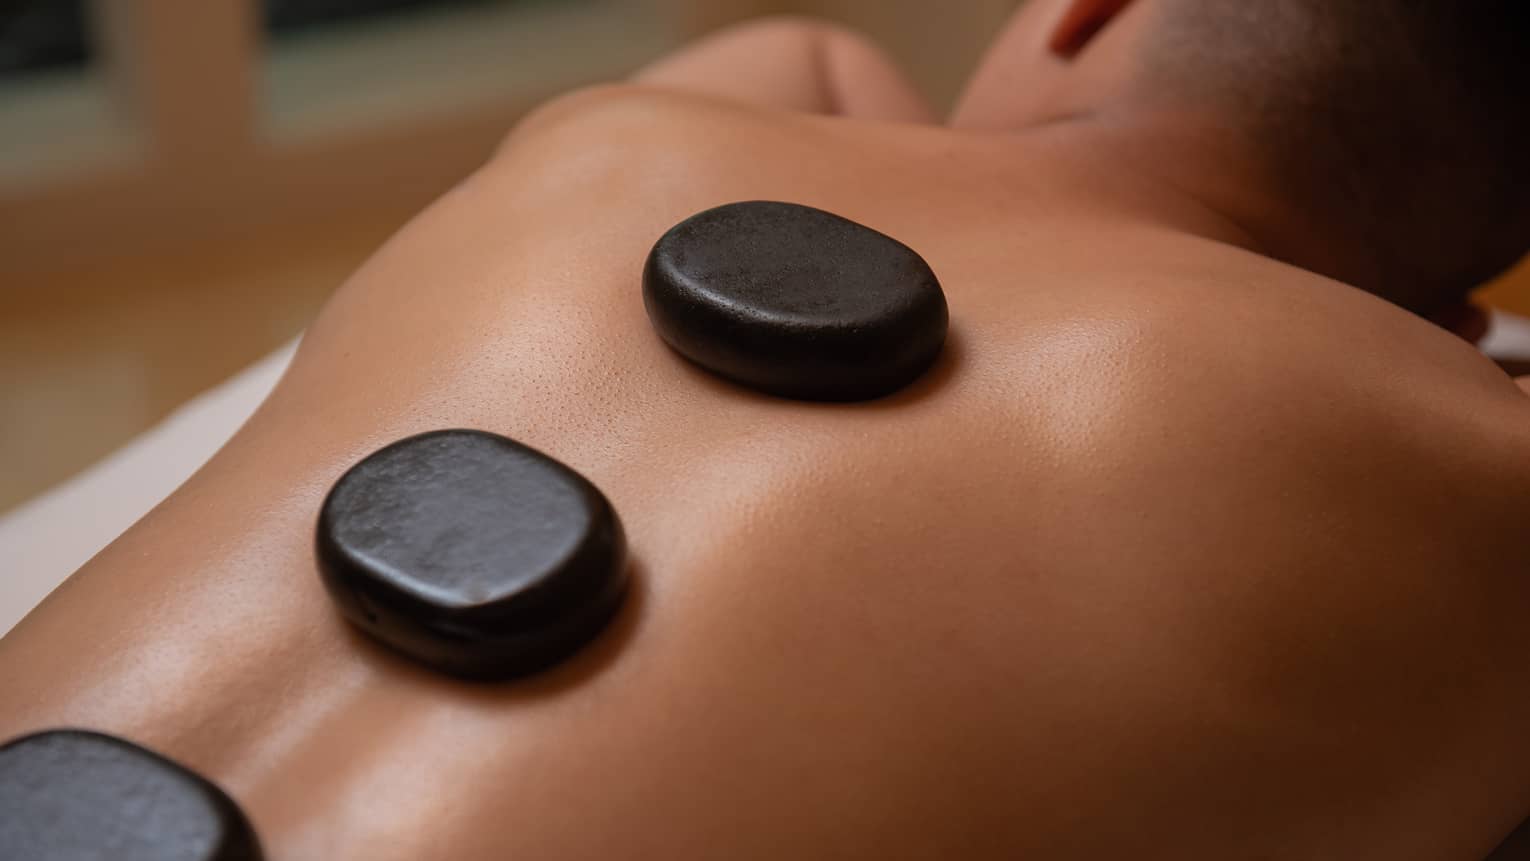 Three large black stones rest on man's bare back and spine as he lays on massage table